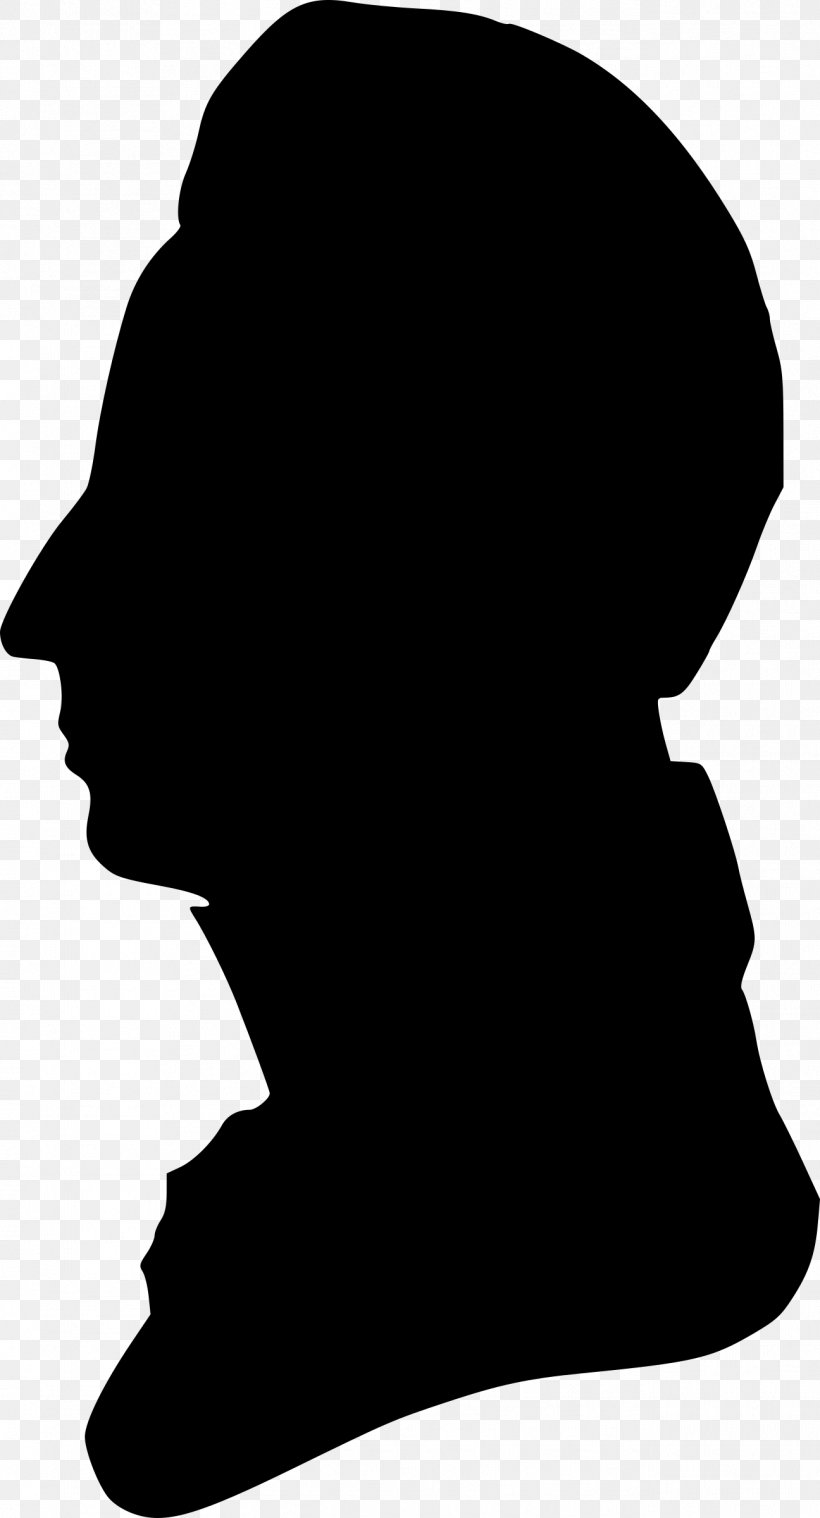 First World War Soldier Clip Art, PNG, 1296x2400px, First World War, American Football Helmets, Army, Black, Black And White Download Free